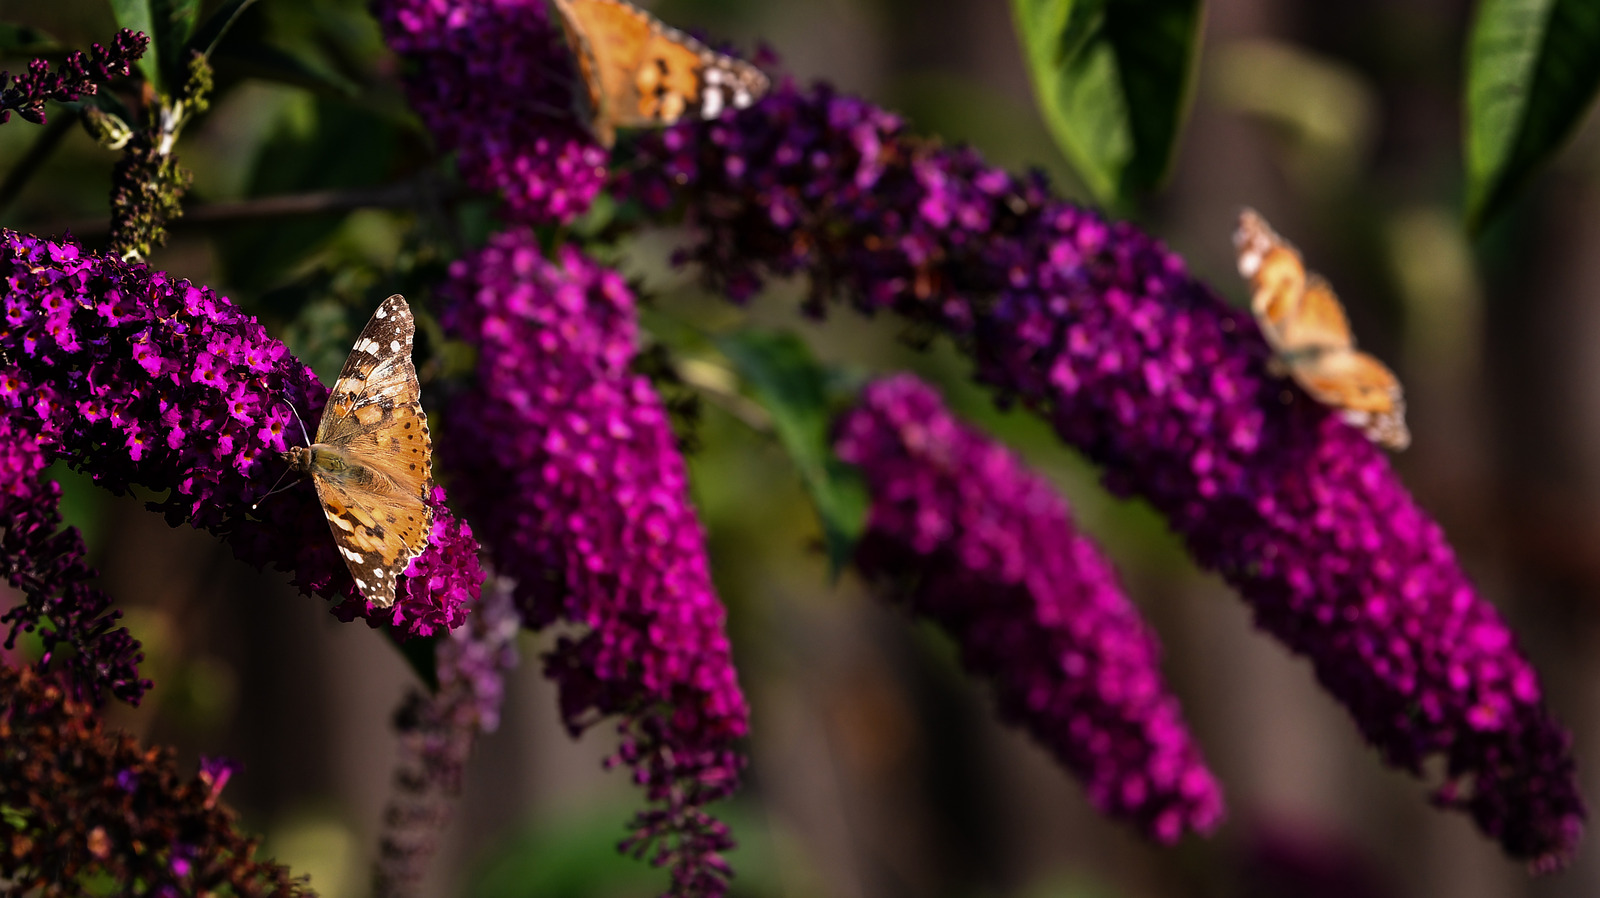 are butterfly bushes poisonous to dogs